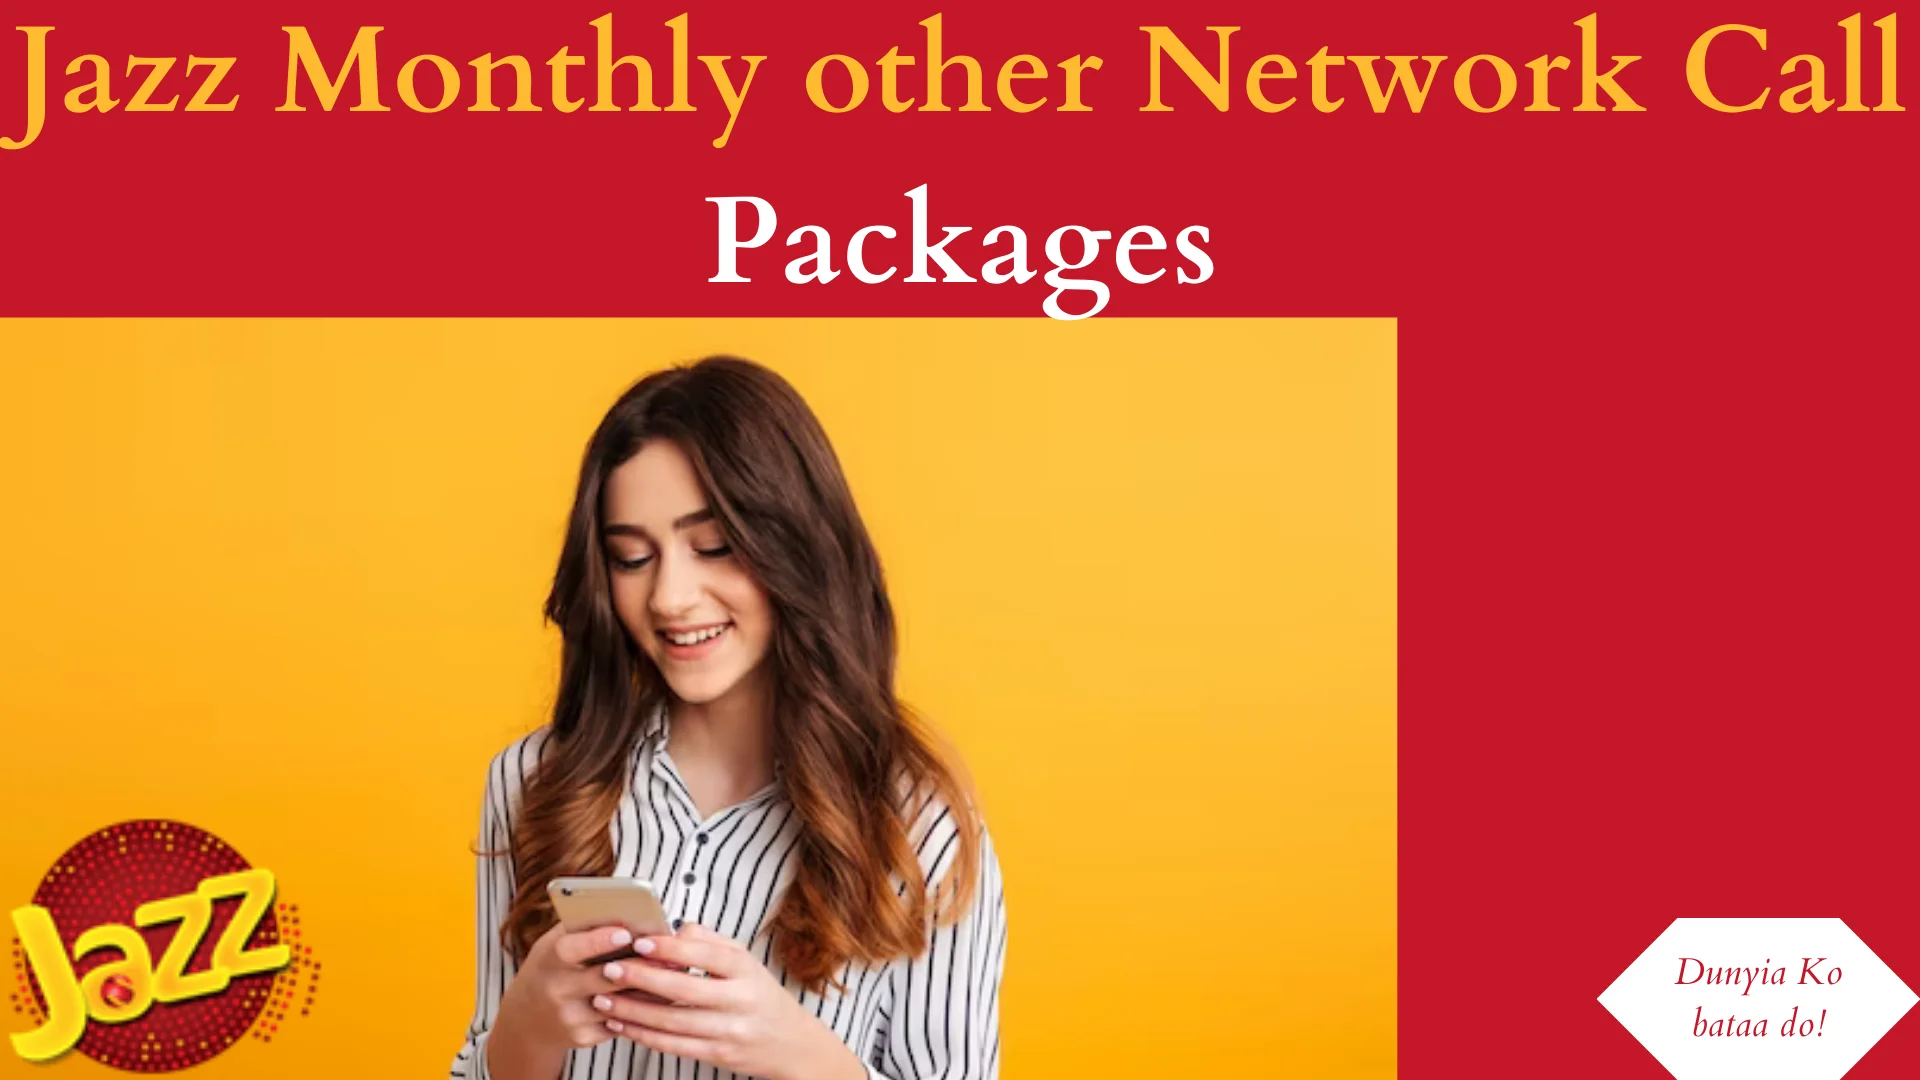 Jazz Monthly other Network Call Packages